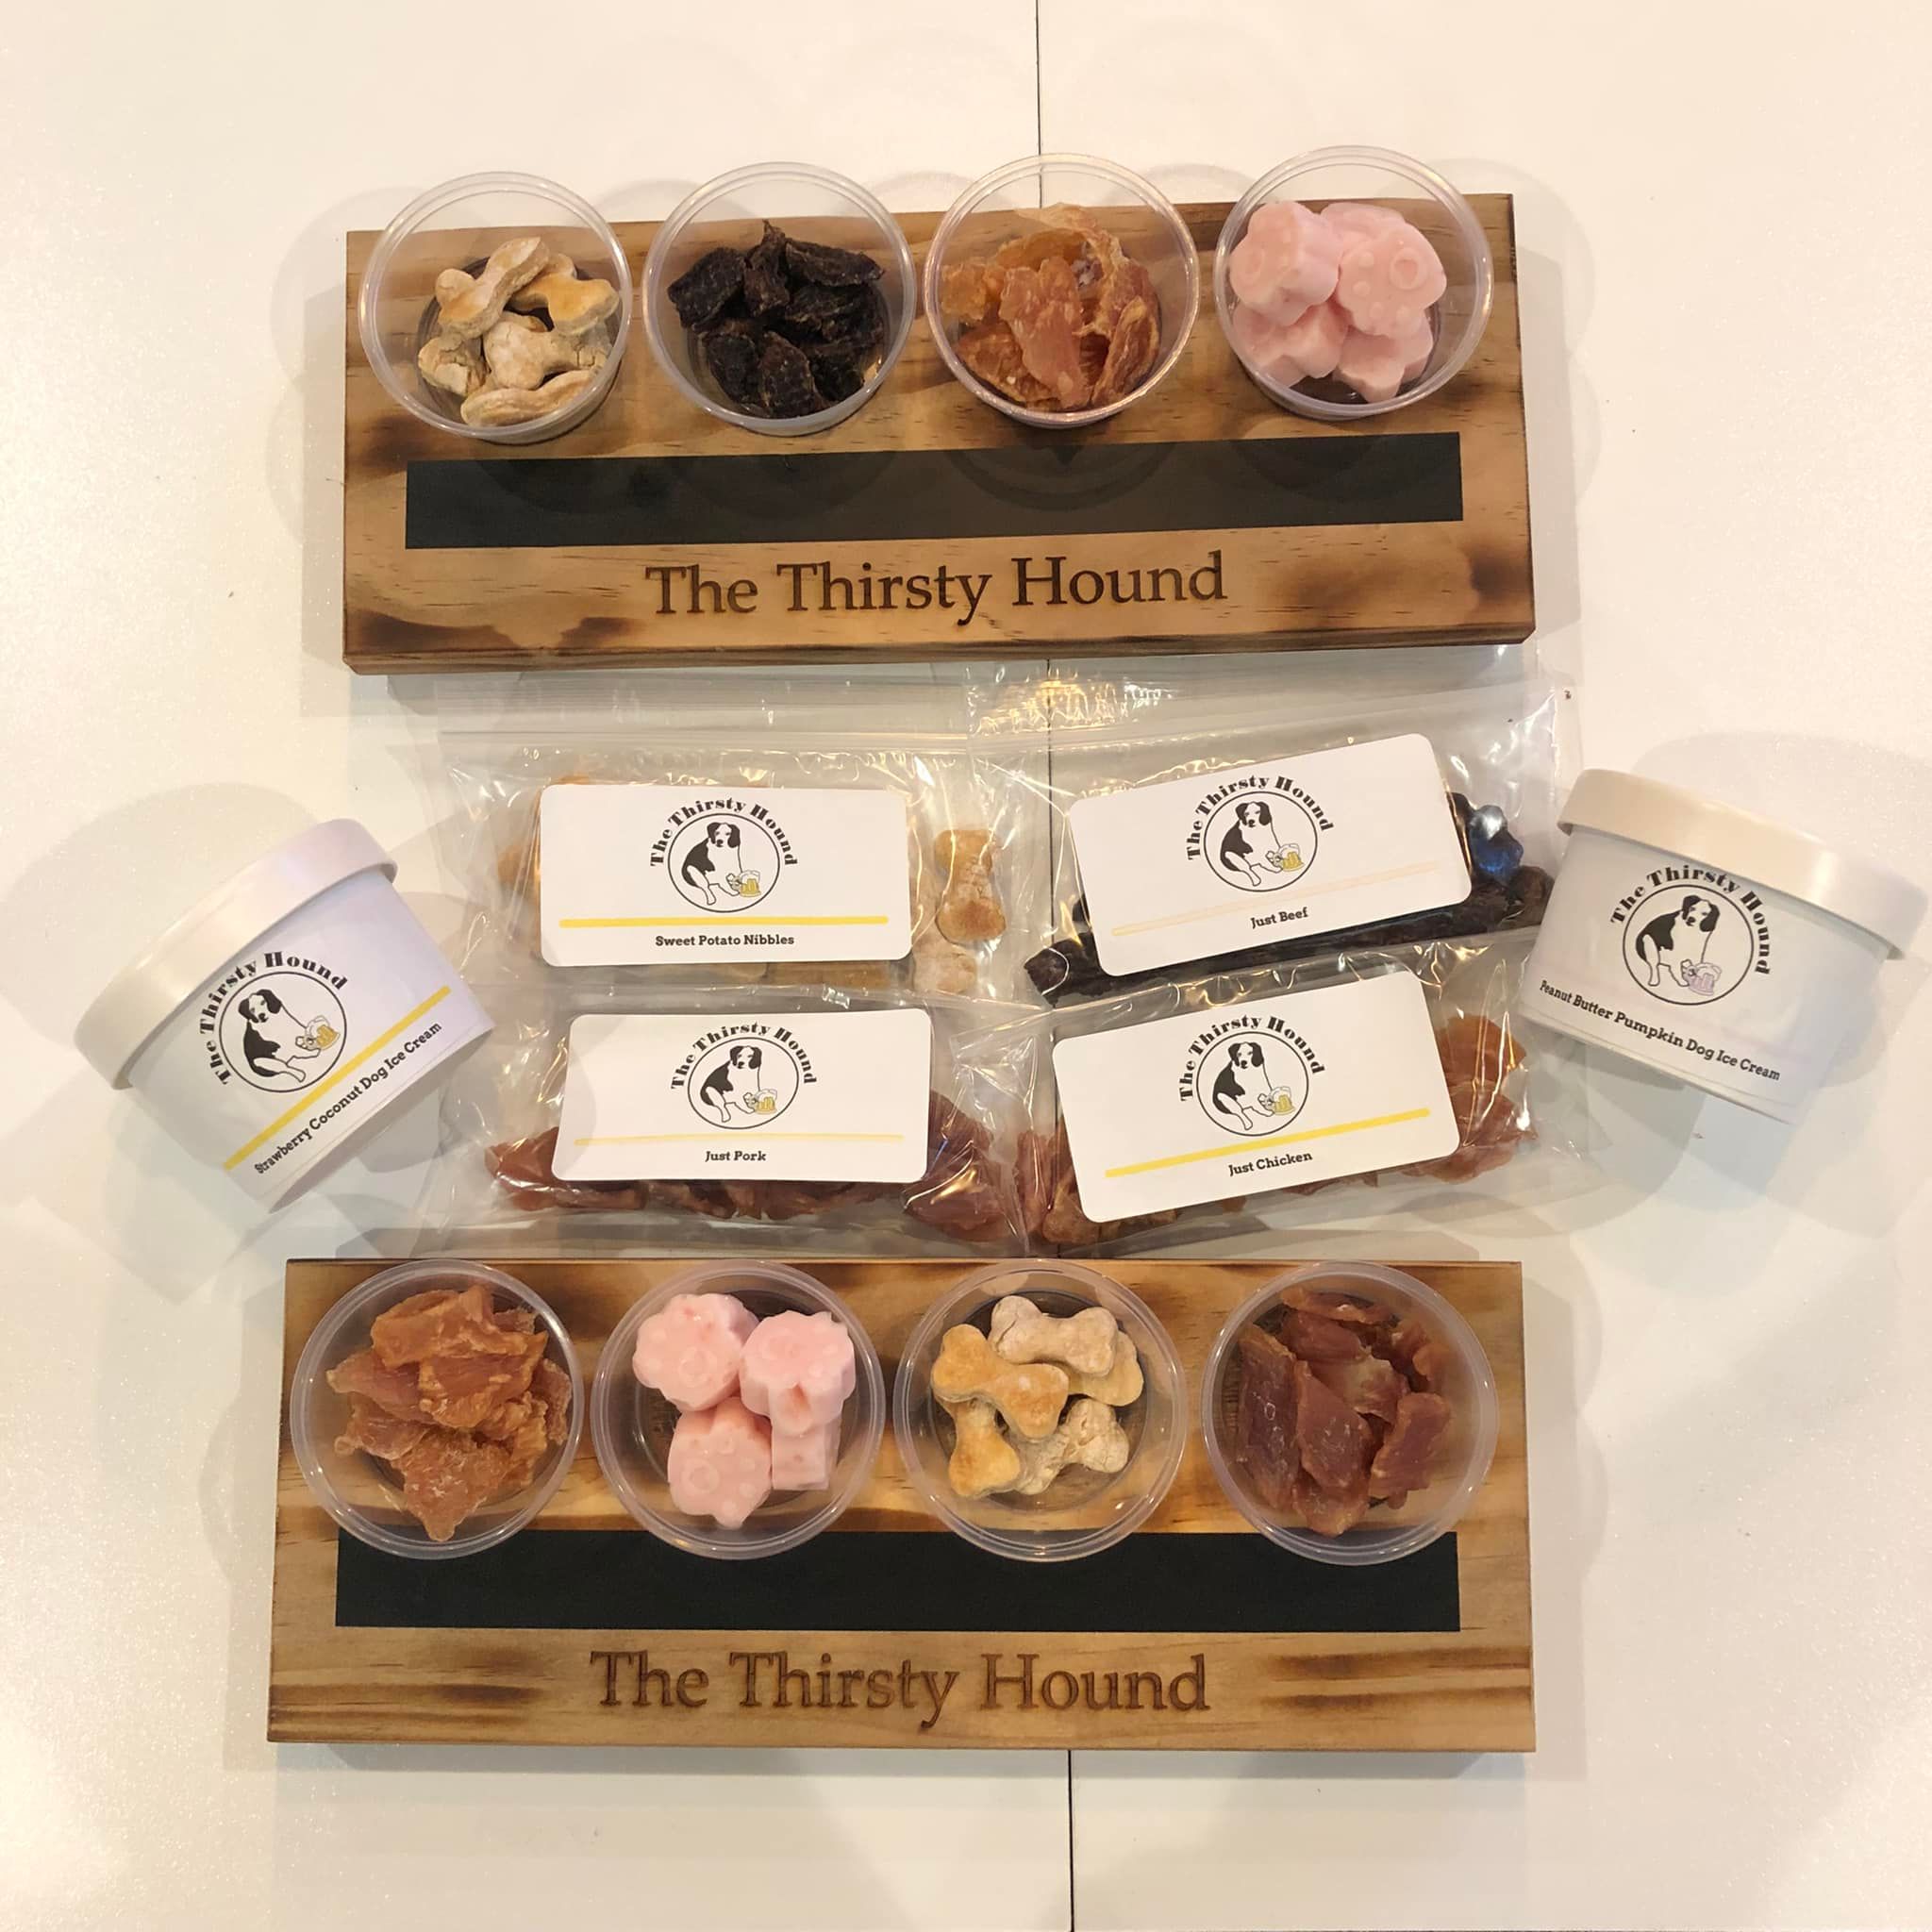 Different kinds of dog treats at The Thirsty Hound.